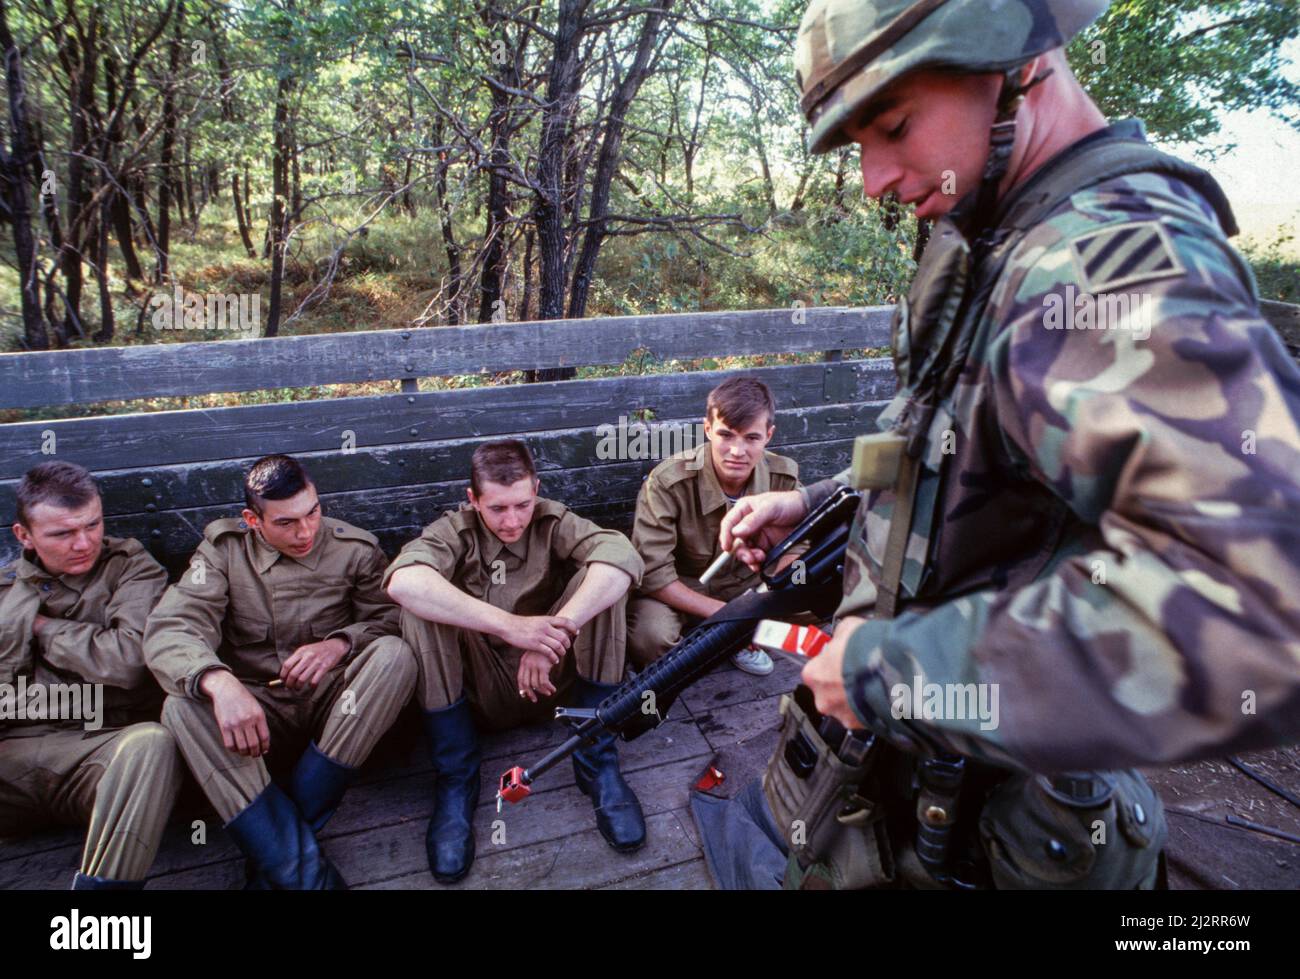 File Photo: Peacekeeper 94, Totskoye, Russia.  Russia and American soldiers took part in the first joint US-Russian military exercises on Russian soil during “Peacekeeper 94” on the Russian military base at Totskoye, 800 miles (1,280km) southeast of Moscow. September 1994. Stock Photo